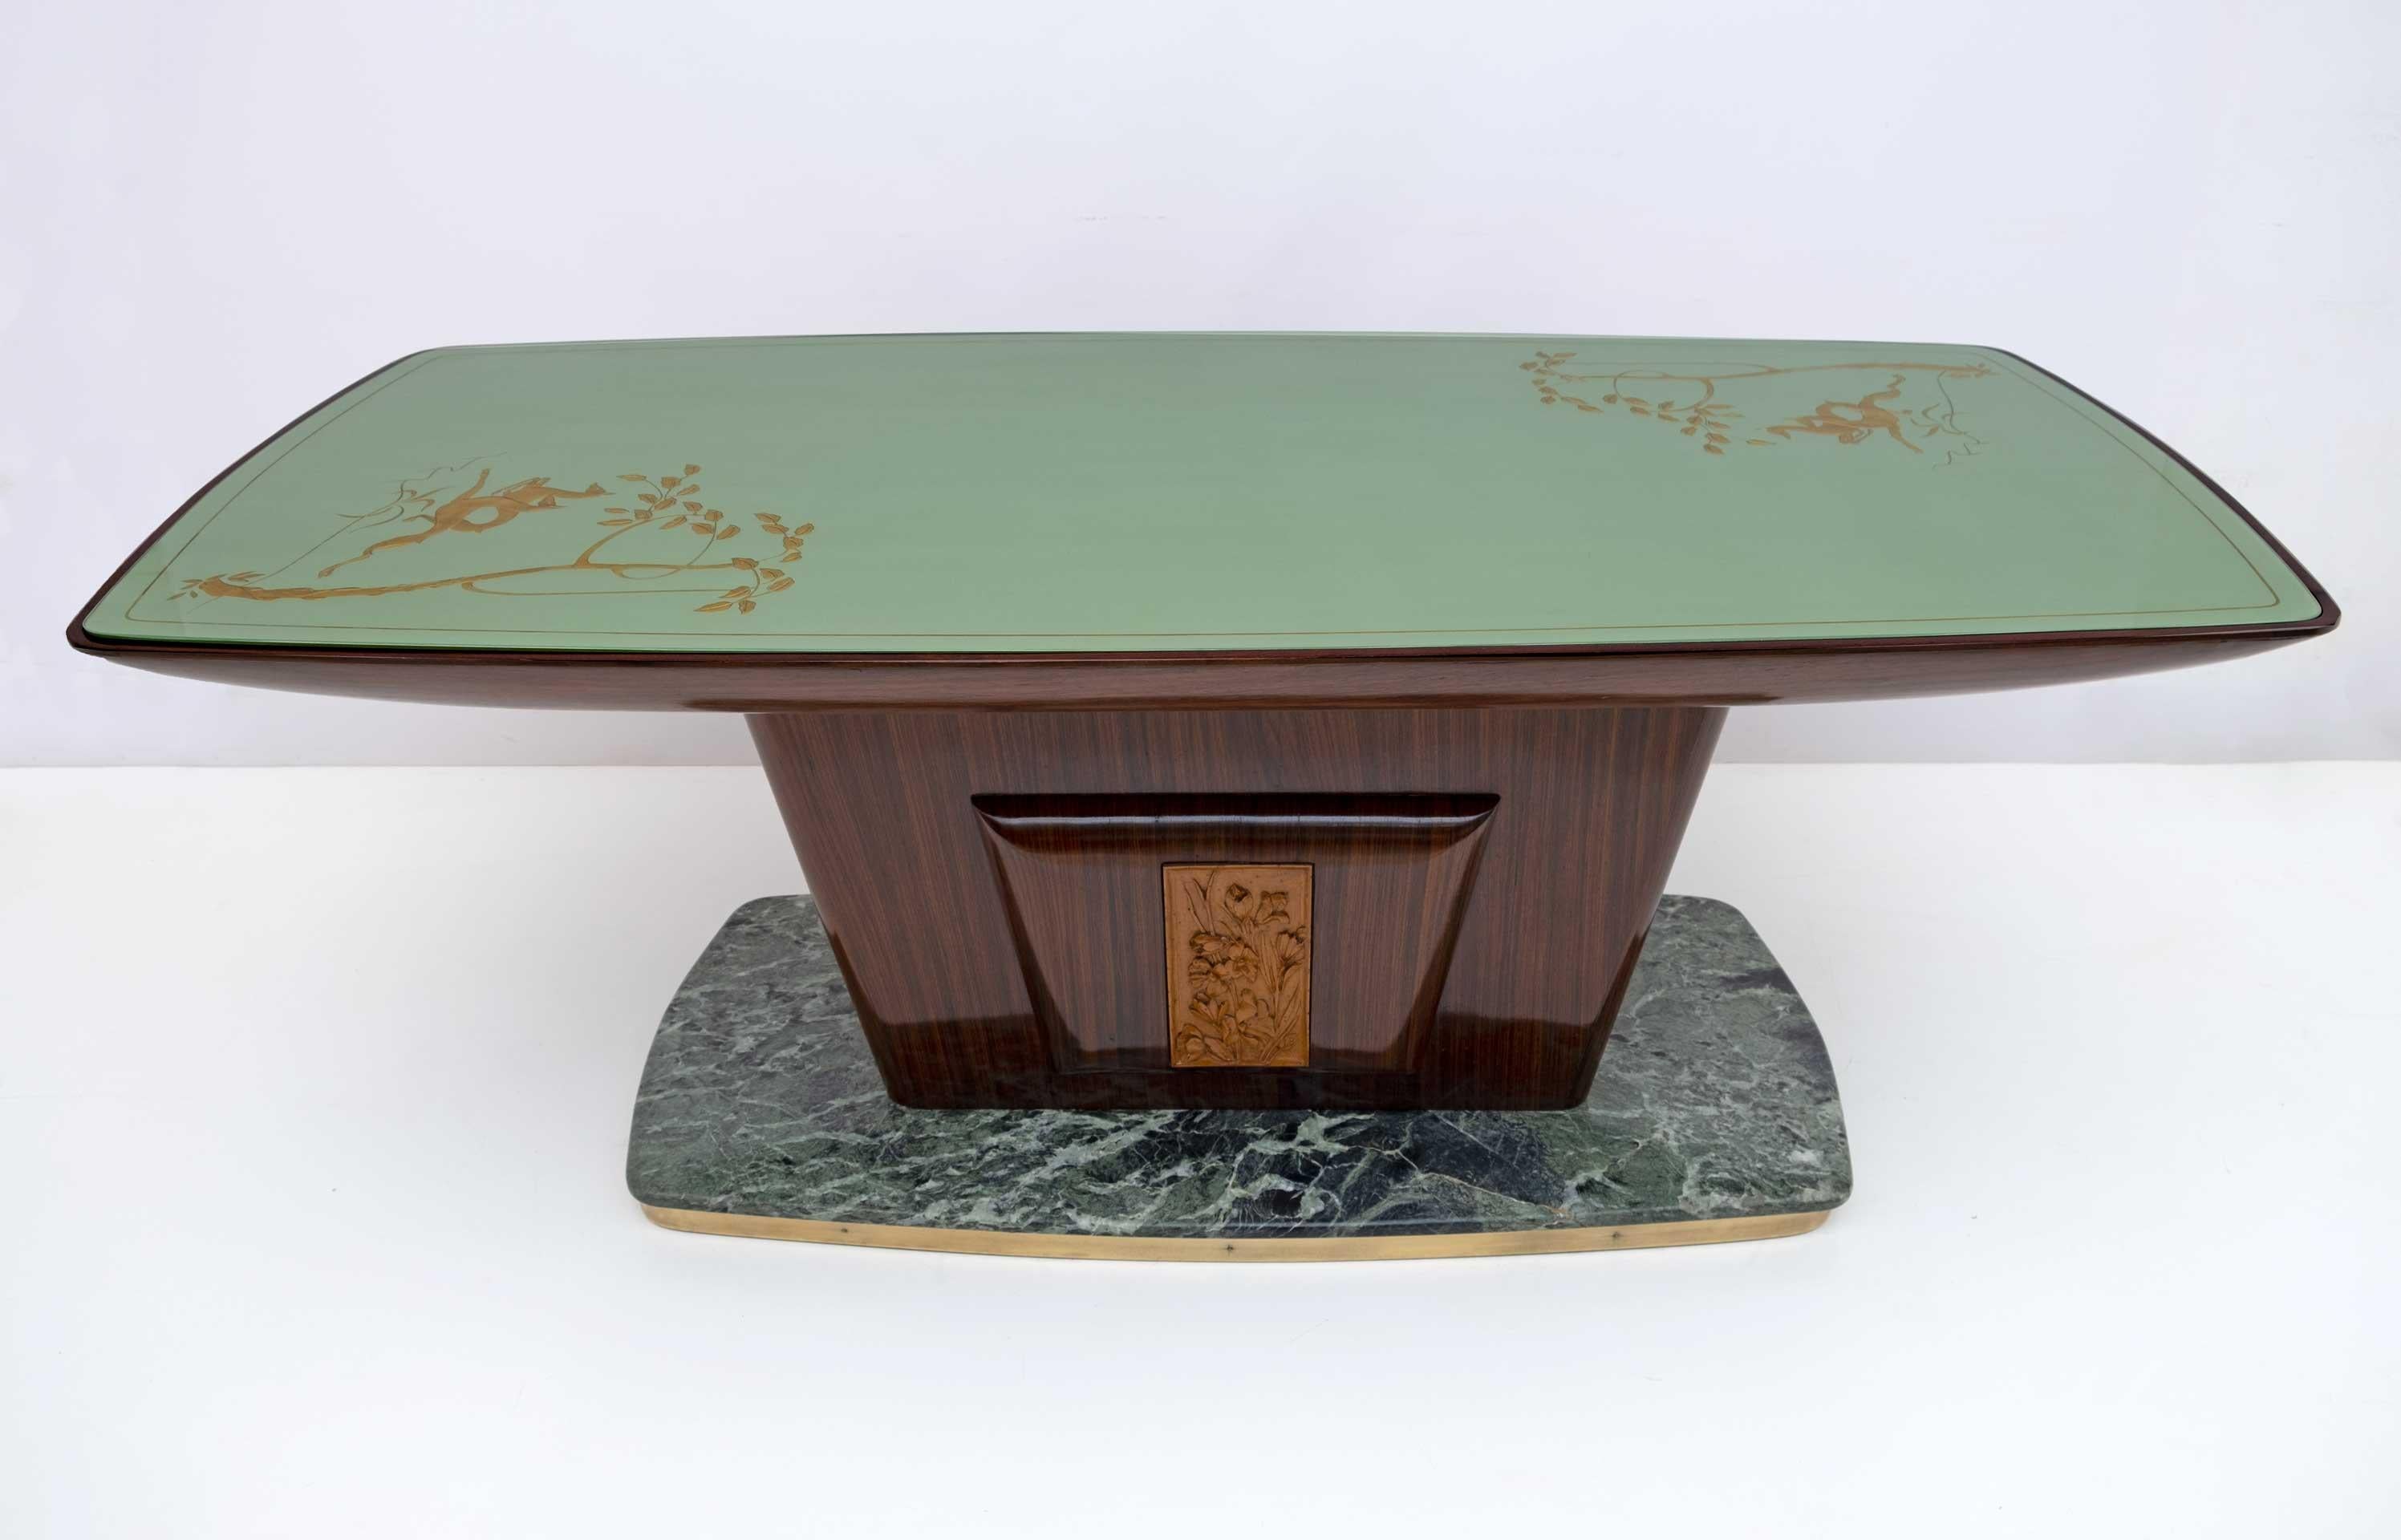 Beautiful table designed by the famous Italian Mid-Century Modern designer Vittorio Dassi, 1950.
The exceptional woodwork is highlighted by the curved green glass top with gold leaf decorations and the rounded edges of the underlying wooden